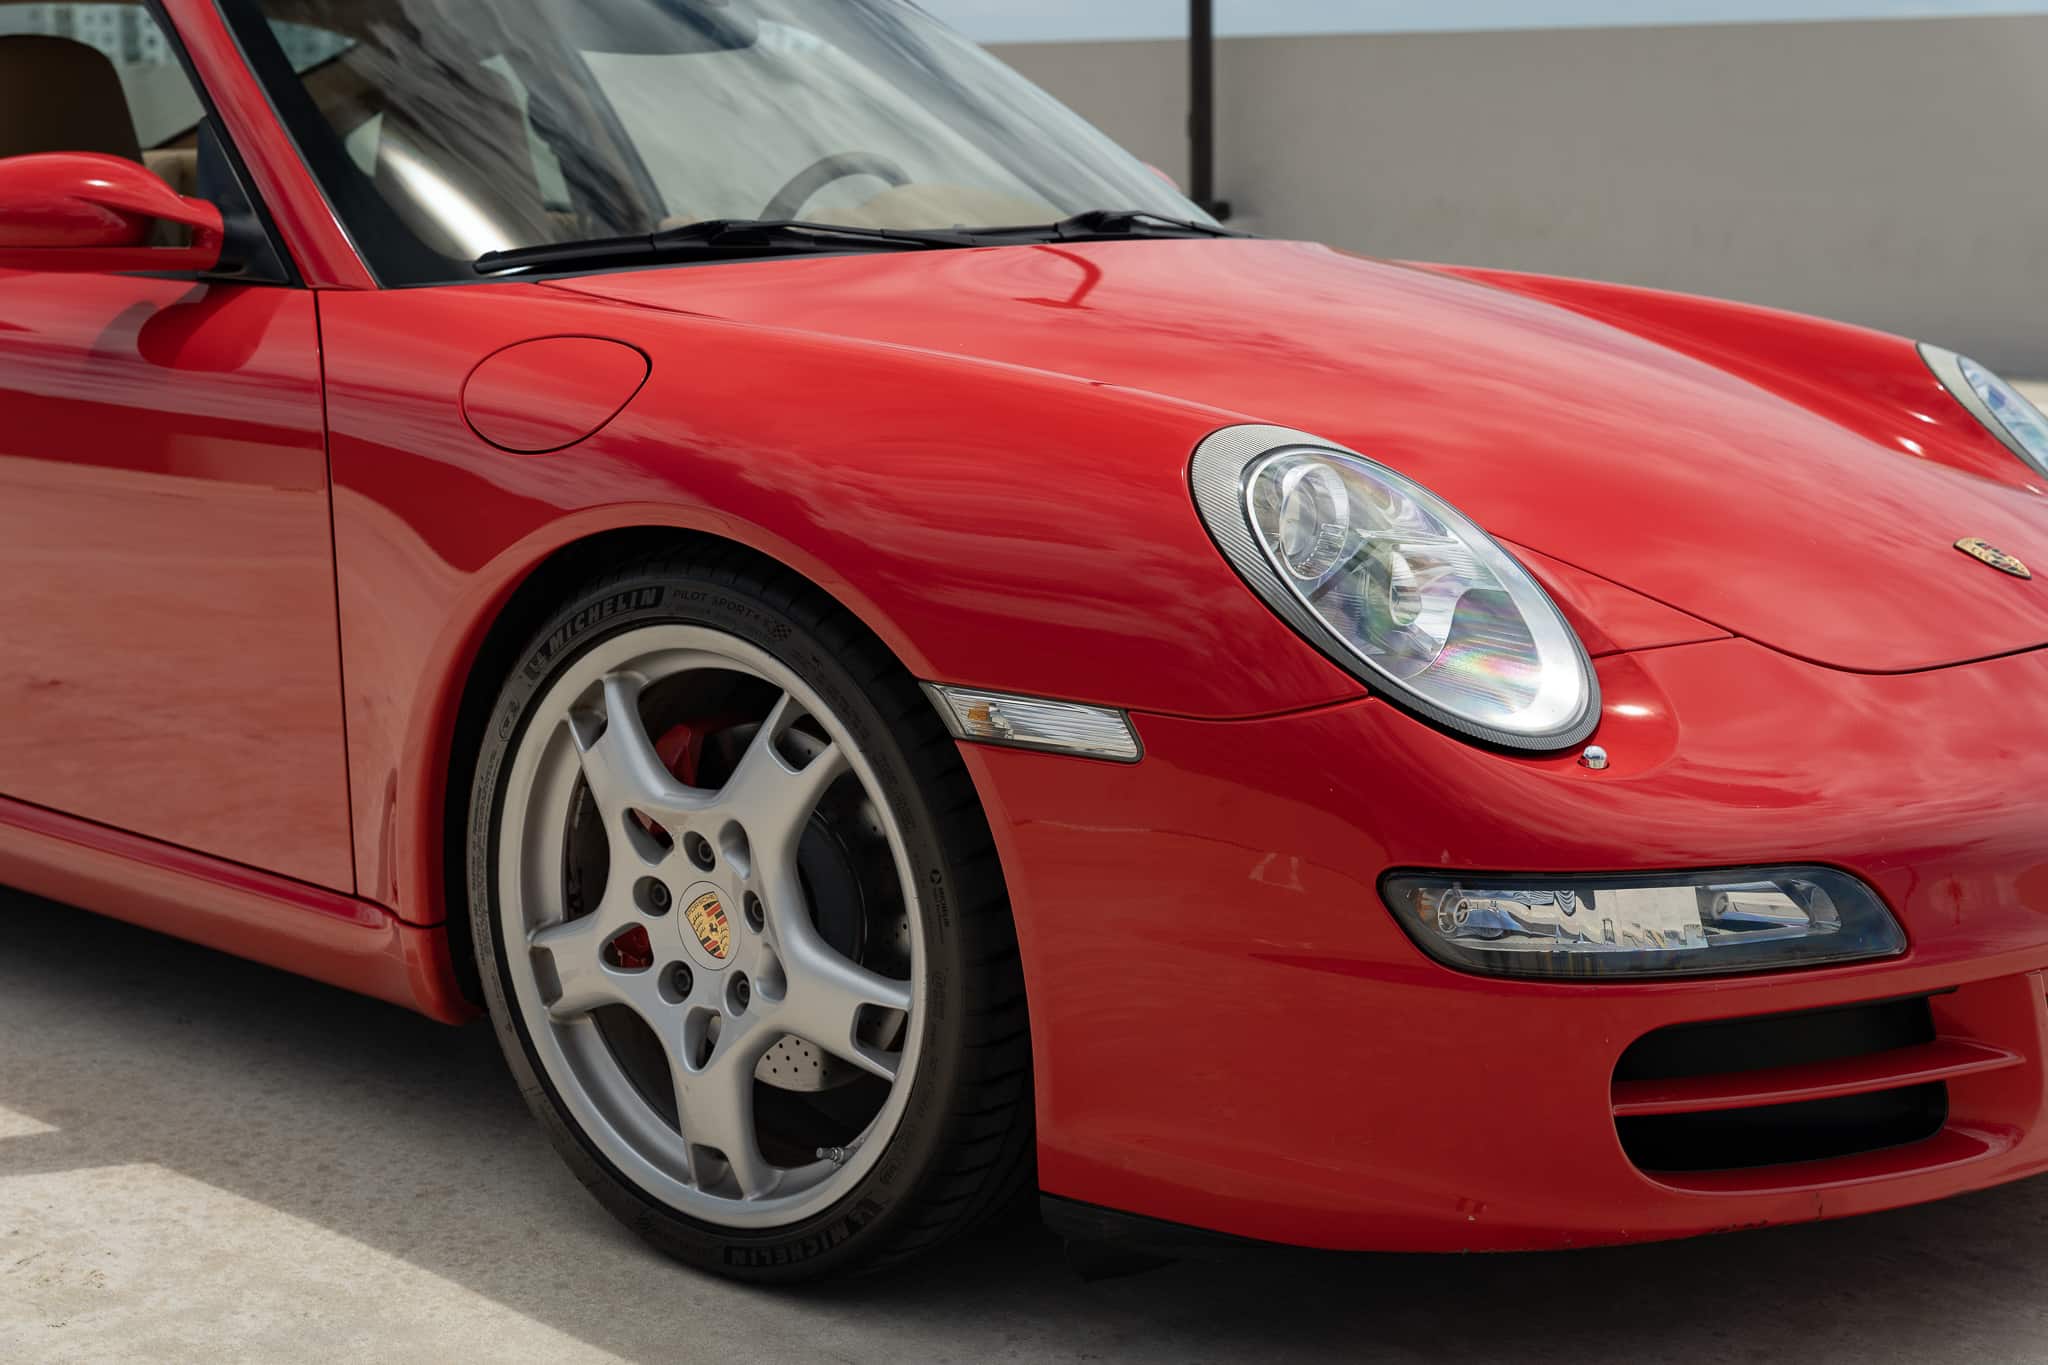 2007 Porsche Carrera S 997.1   6 Speed Manual – New PS4s Tires – Bose Audio – Sport Chrono – Only 53k Miles